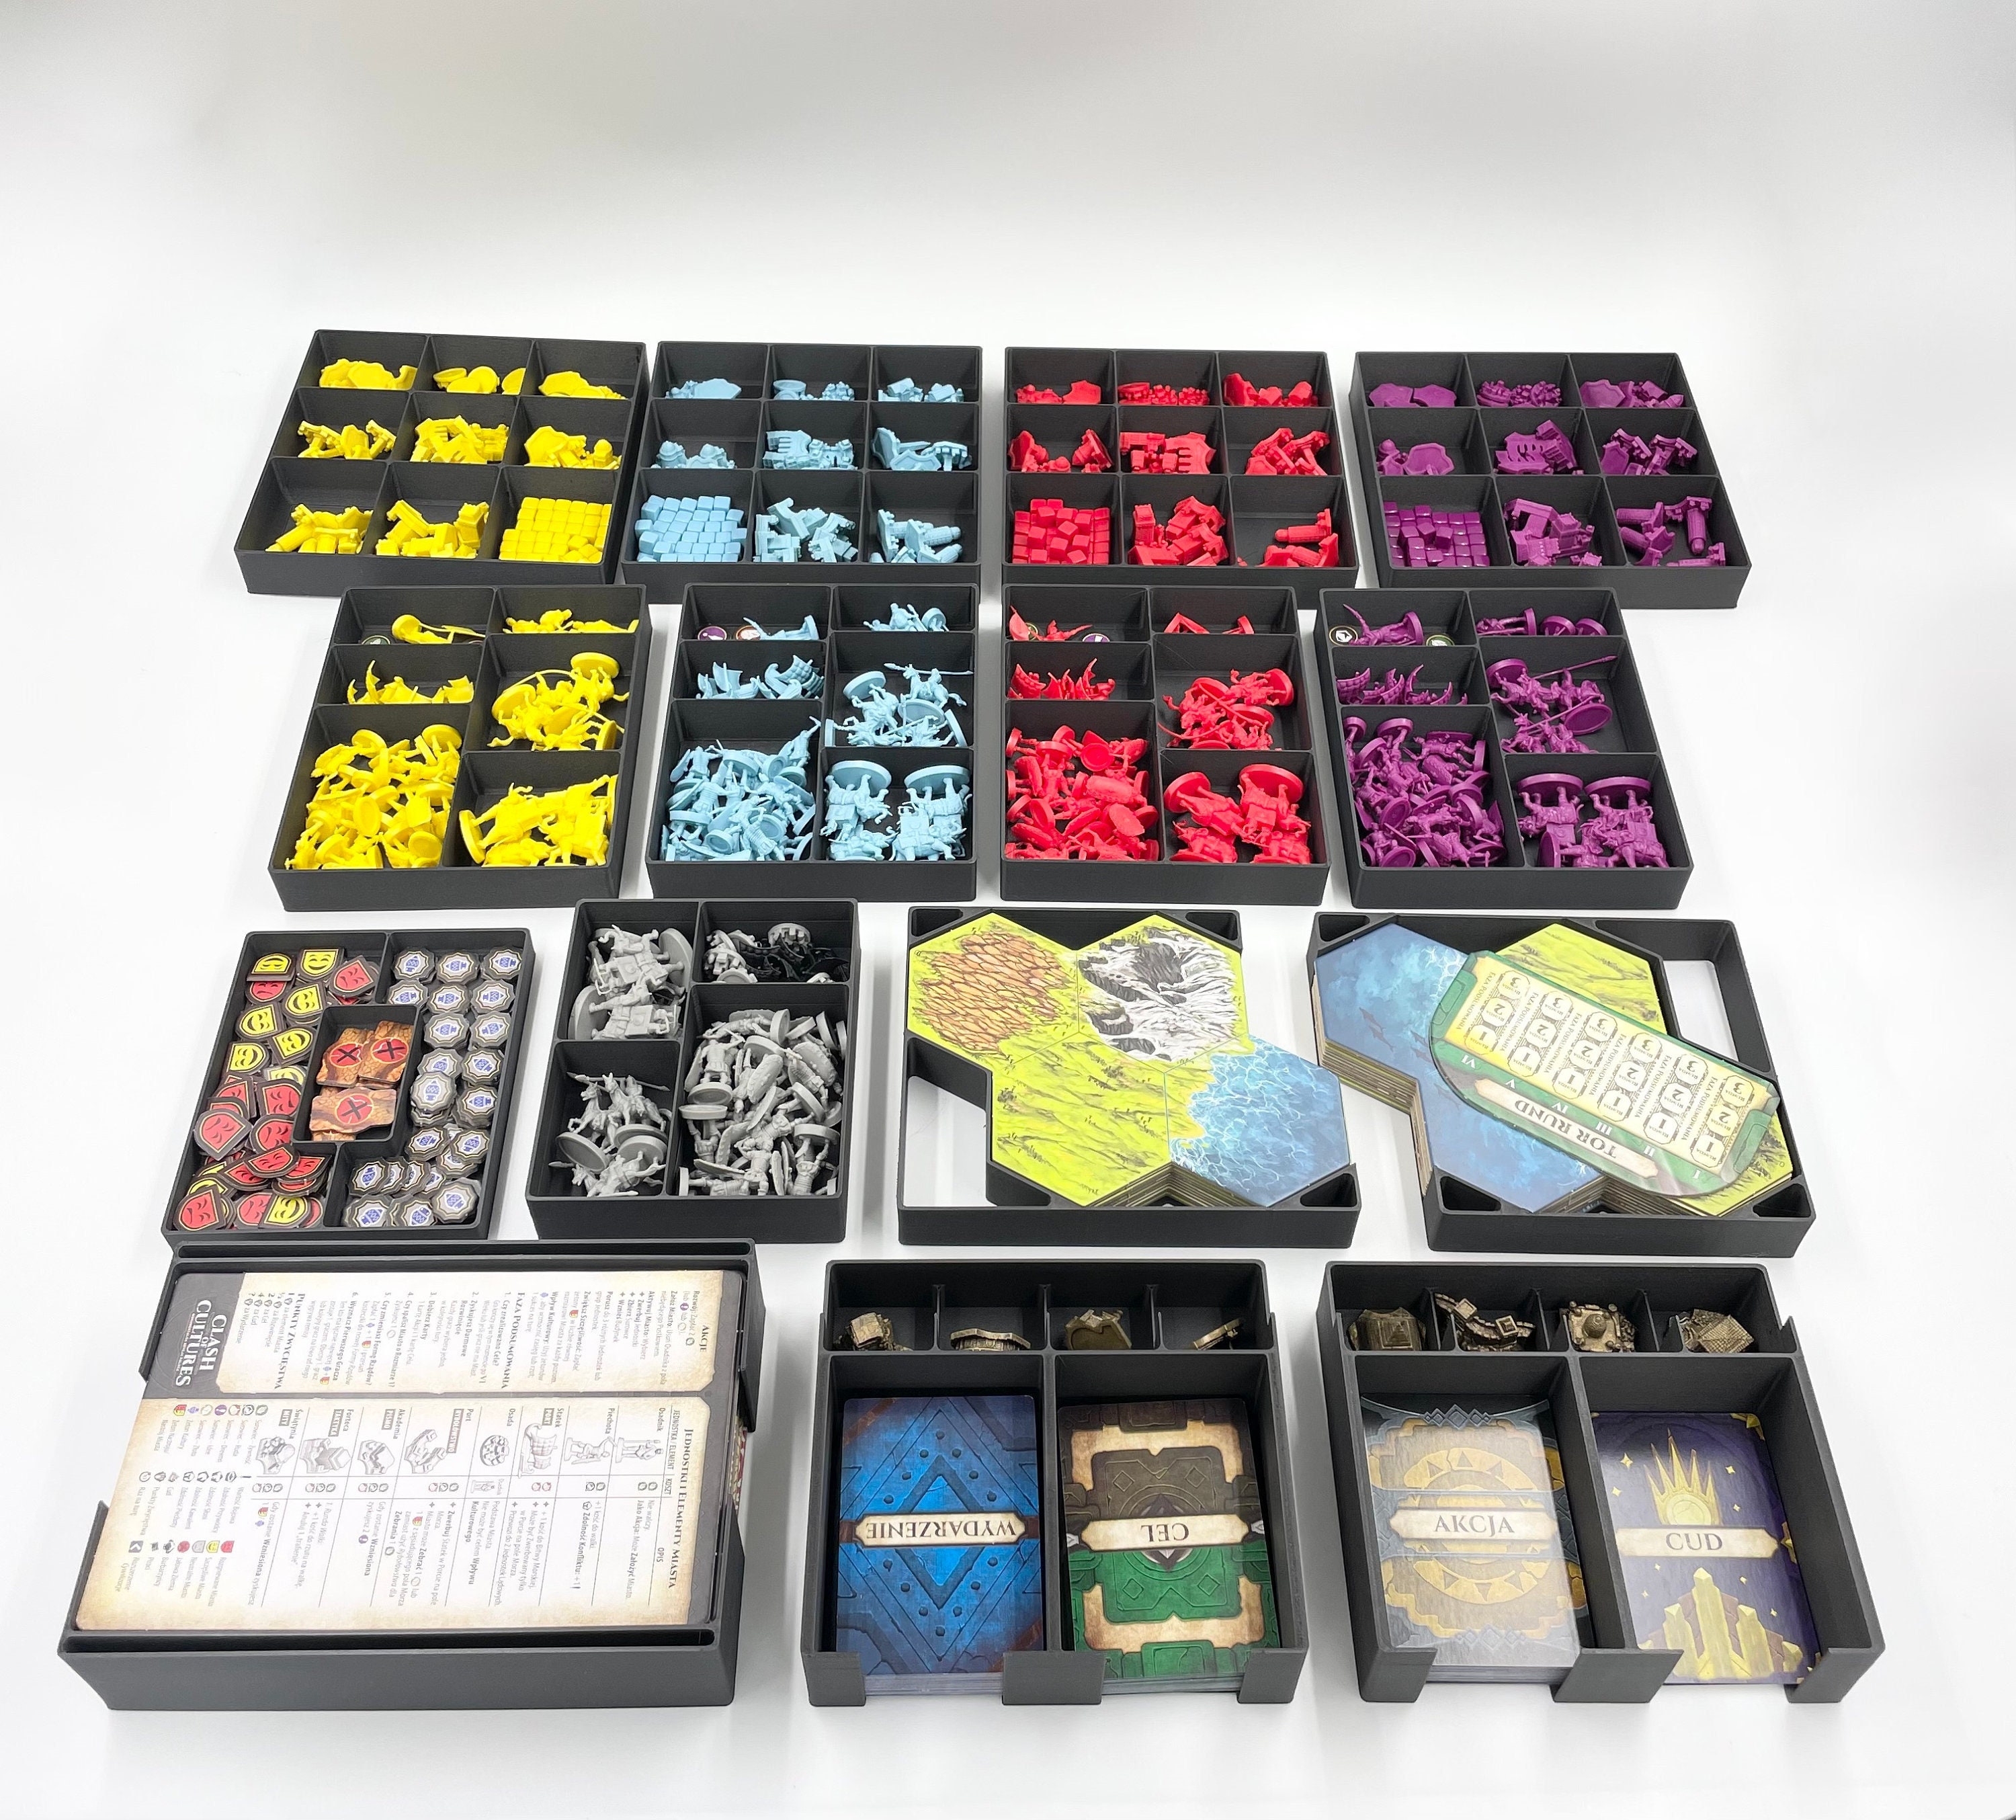 Really Neat modern Art Card Game Organizer Holds Gampieces Neatly, Similar  to Dominion, Concordia, Ra, Pizarro & Co, Cyclades, Container 